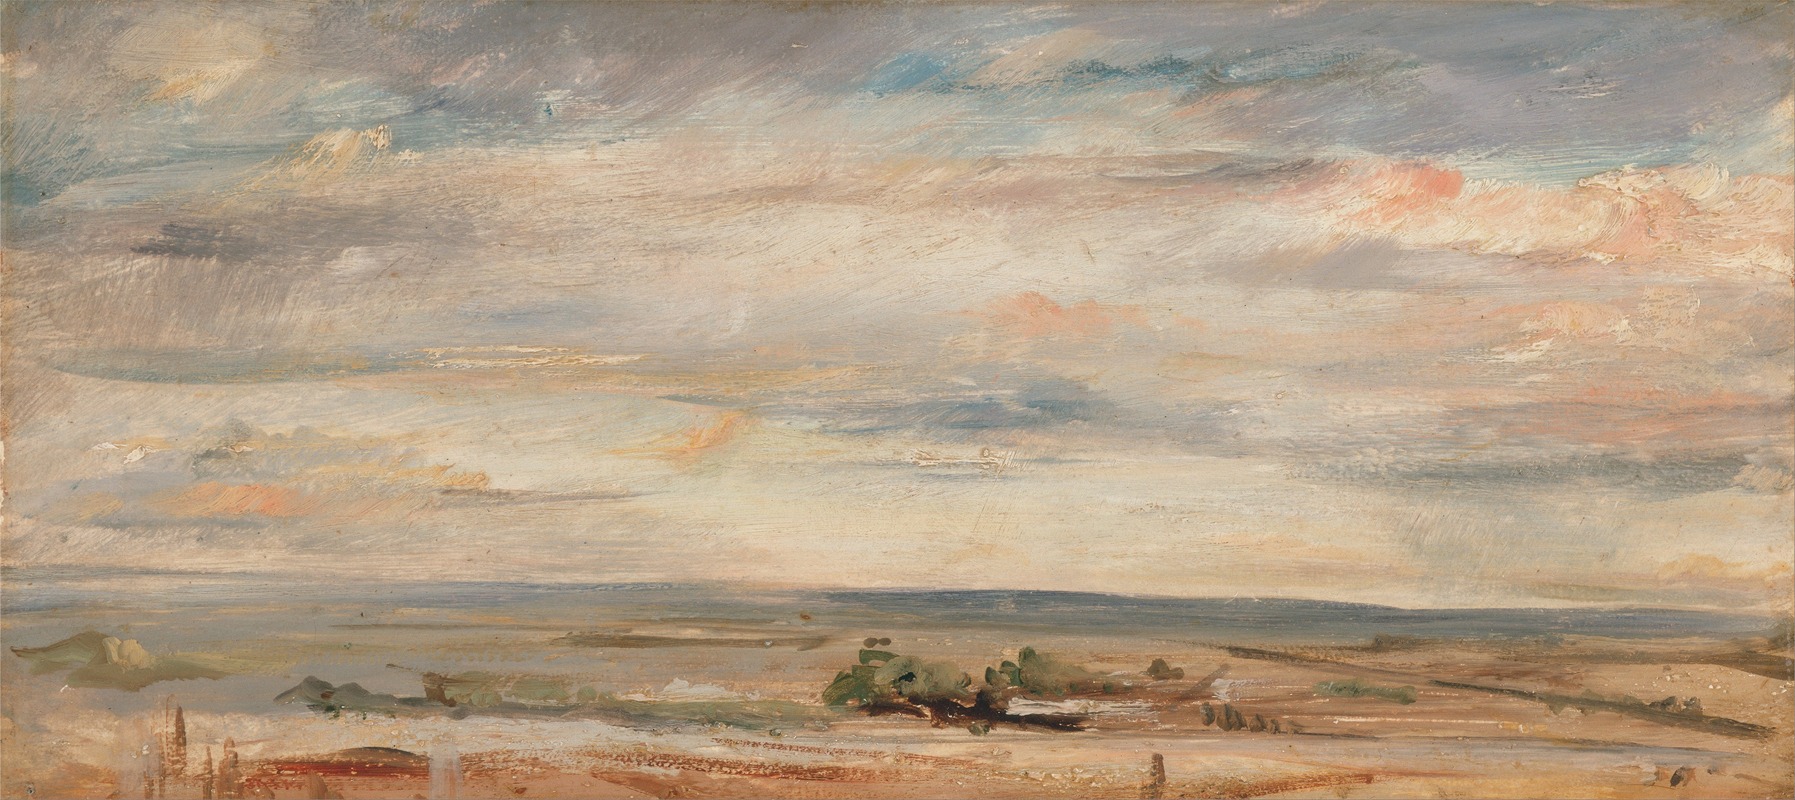 John Constable - Cloud Study, Early Morning, Looking East from Hampstead